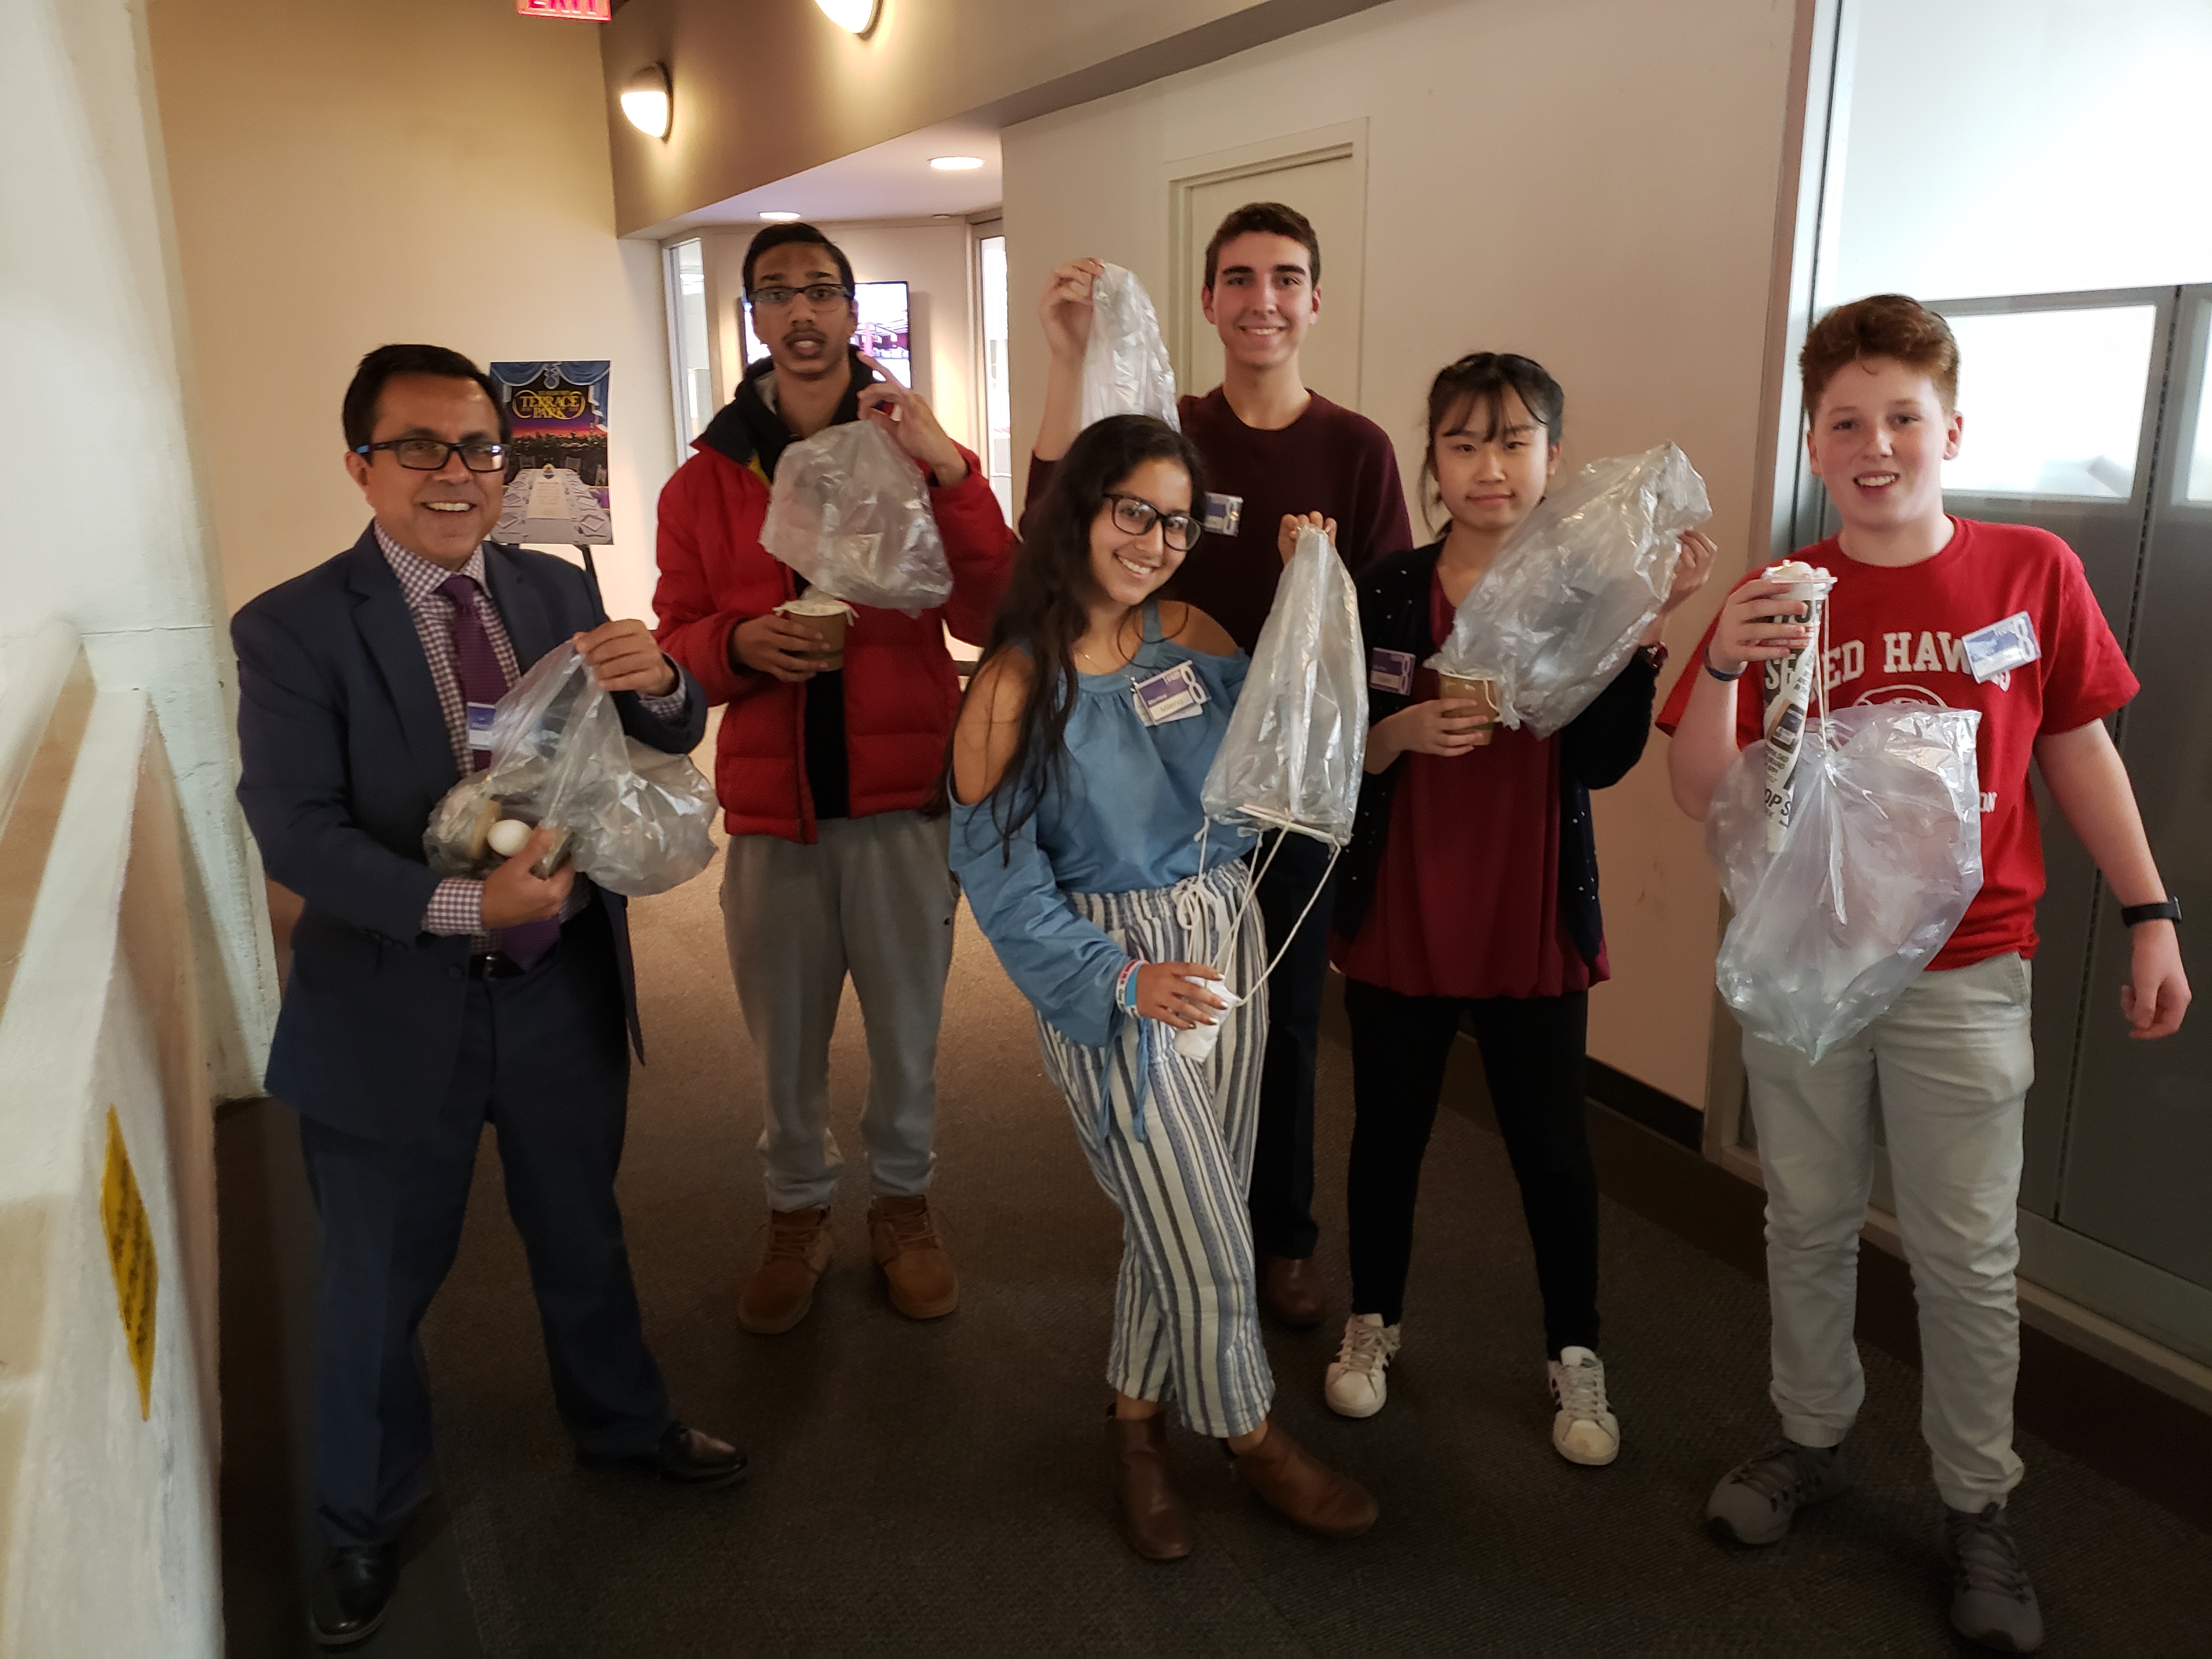 Ace students and their mentor hold up plastic bags in a group photo.